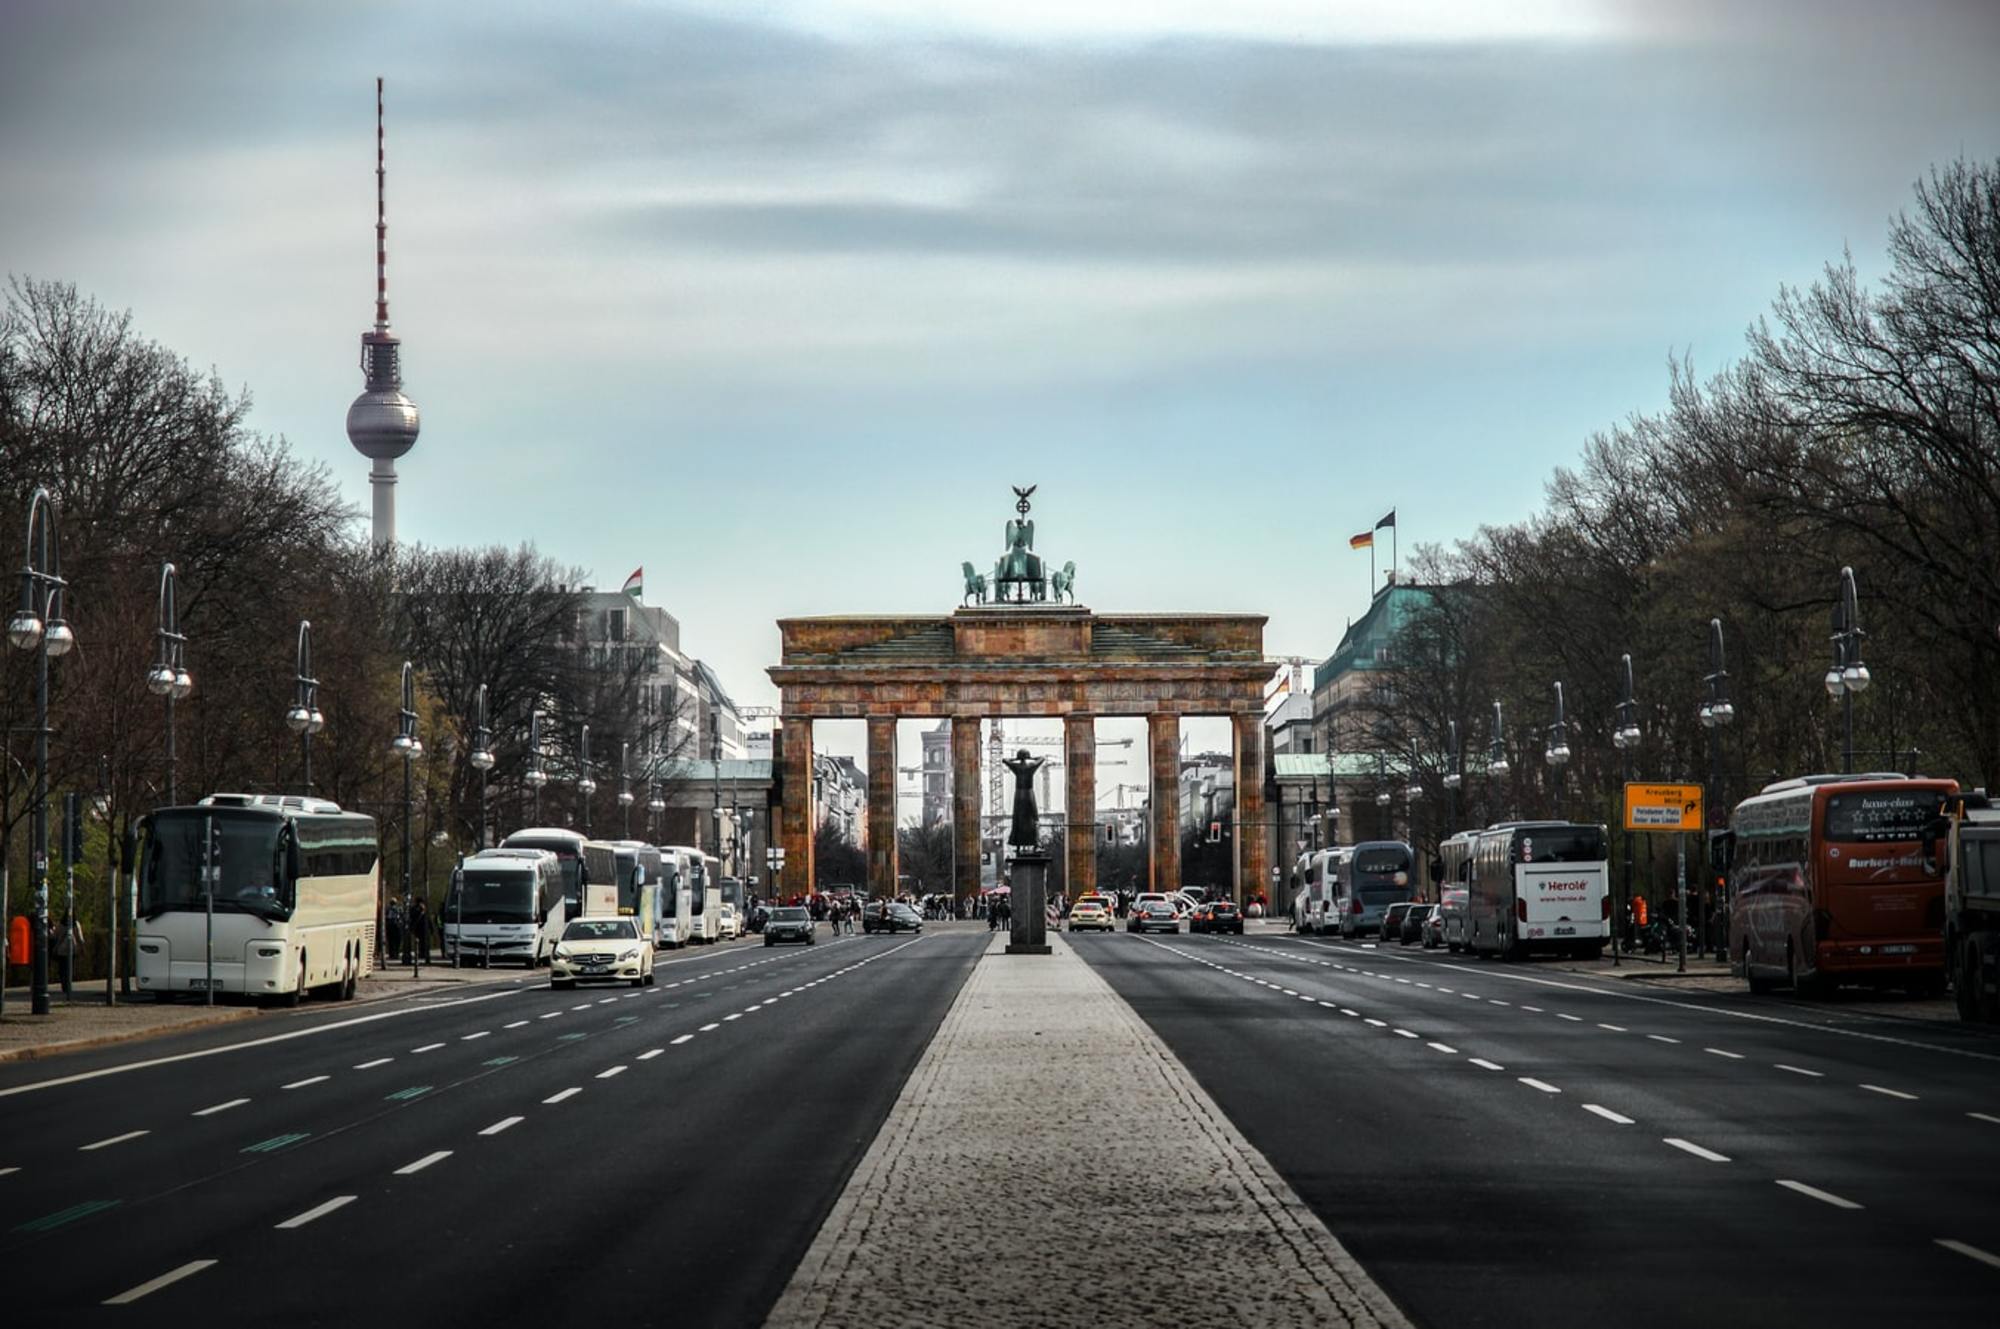 Germany: Berlin and accommodation search